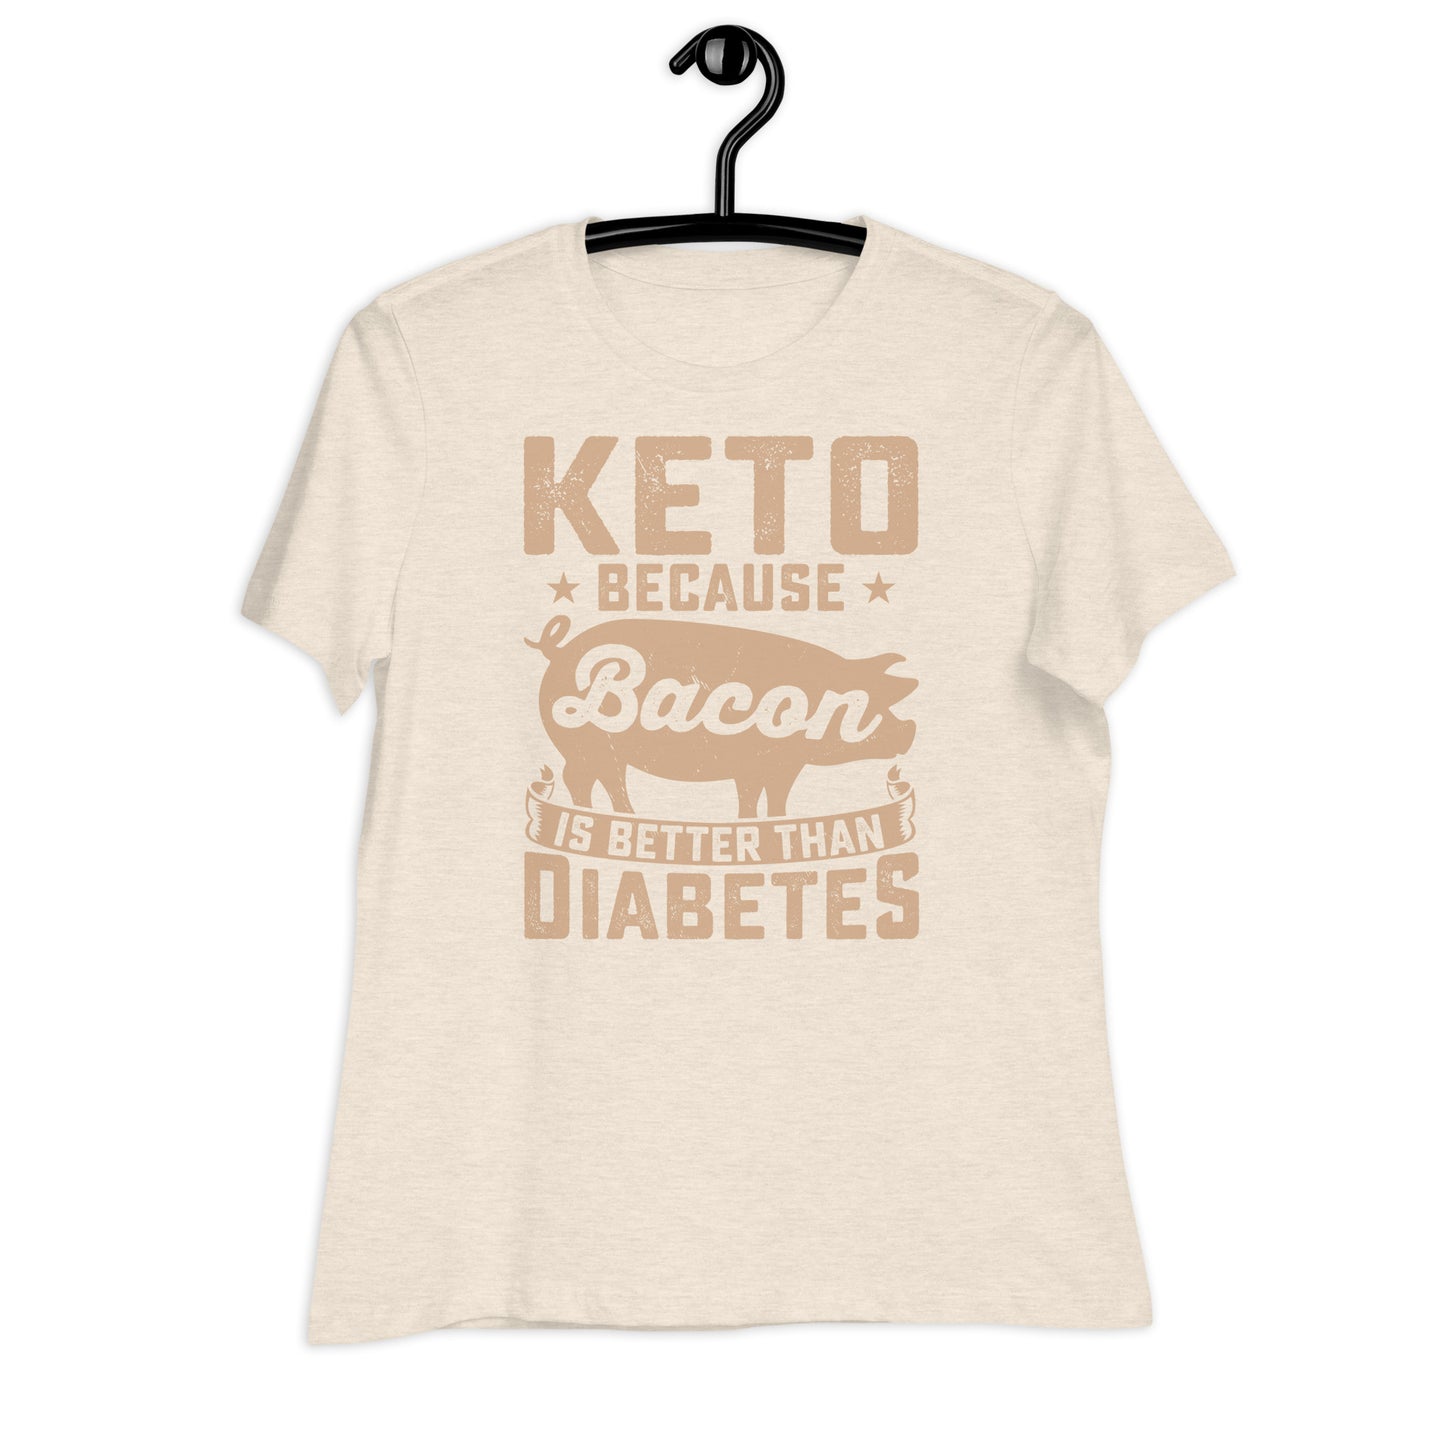 Keto Because Bacon is Better Than Diabetes Bella Canvas Relaxed Women's T-Shirt